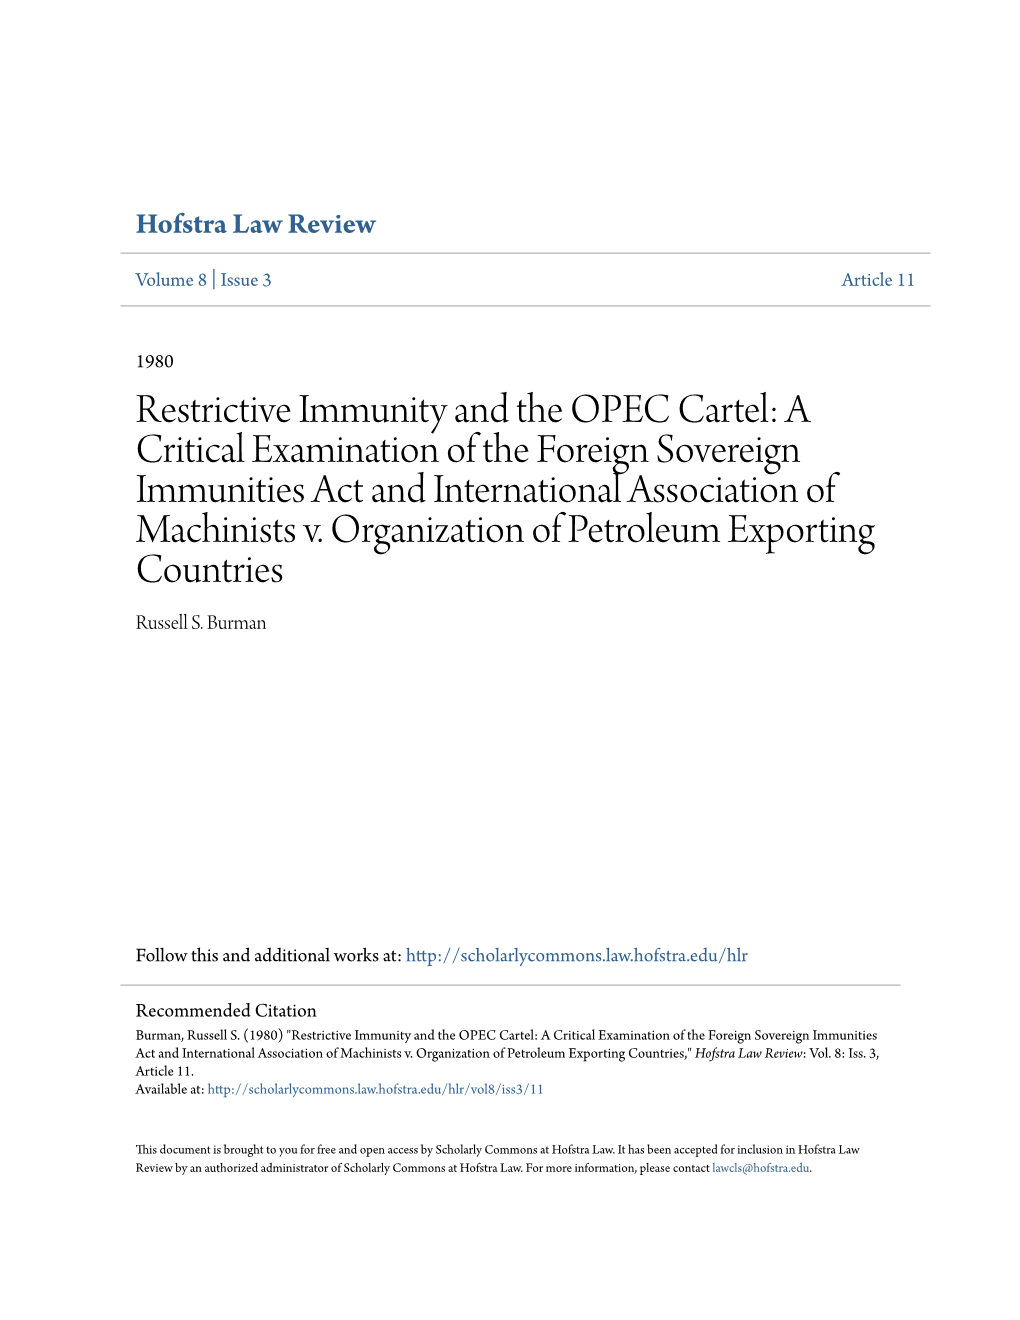 Restrictive Immunity and the OPEC Cartel: a Critical Examination of the Foreign Sovereign Immunities Act and International Association of Machinists V